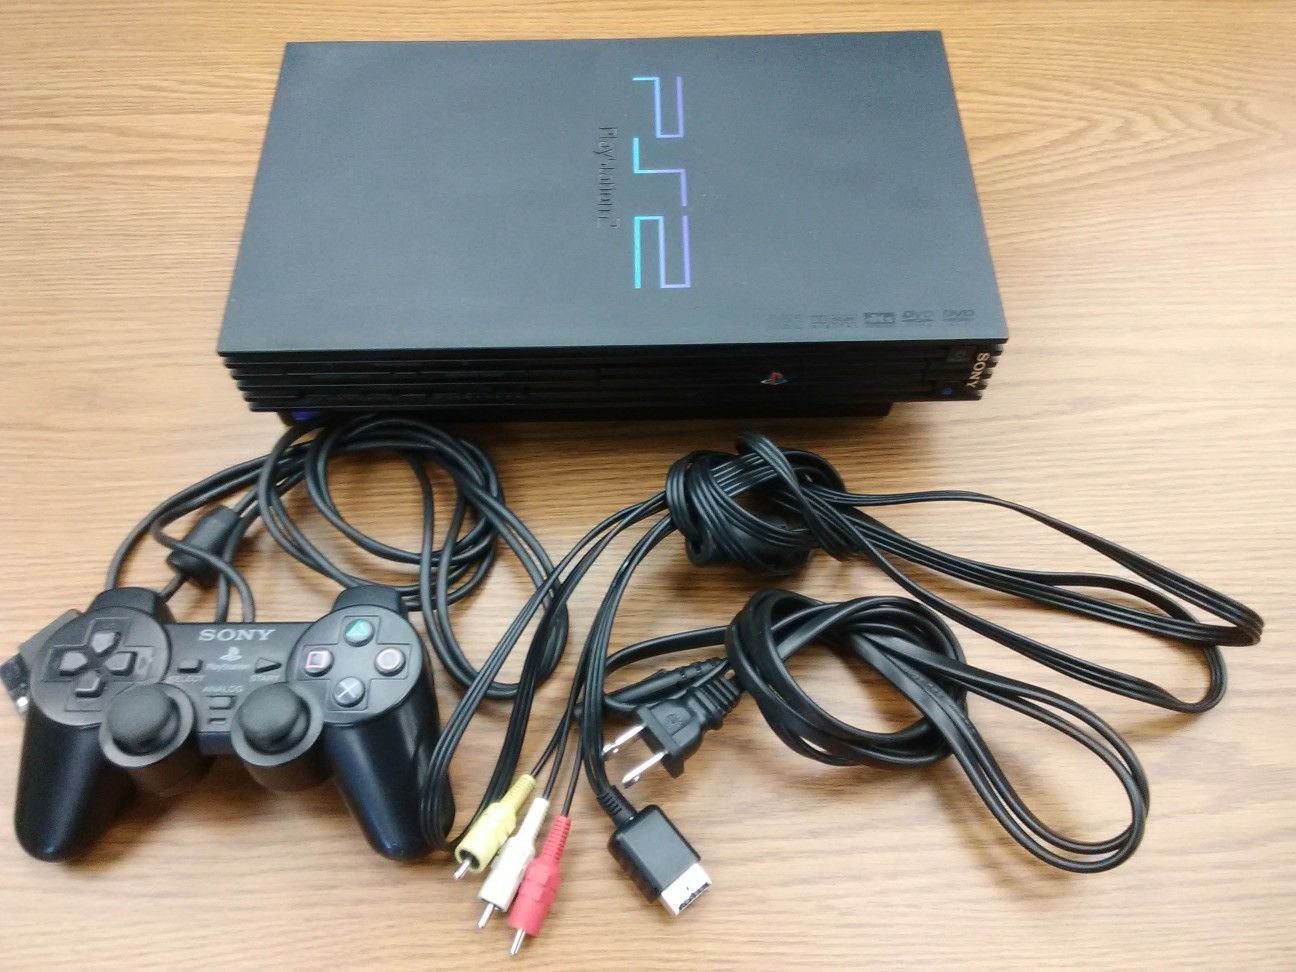 PS 2 bundle with games, light guns and Sony 27 inch TV